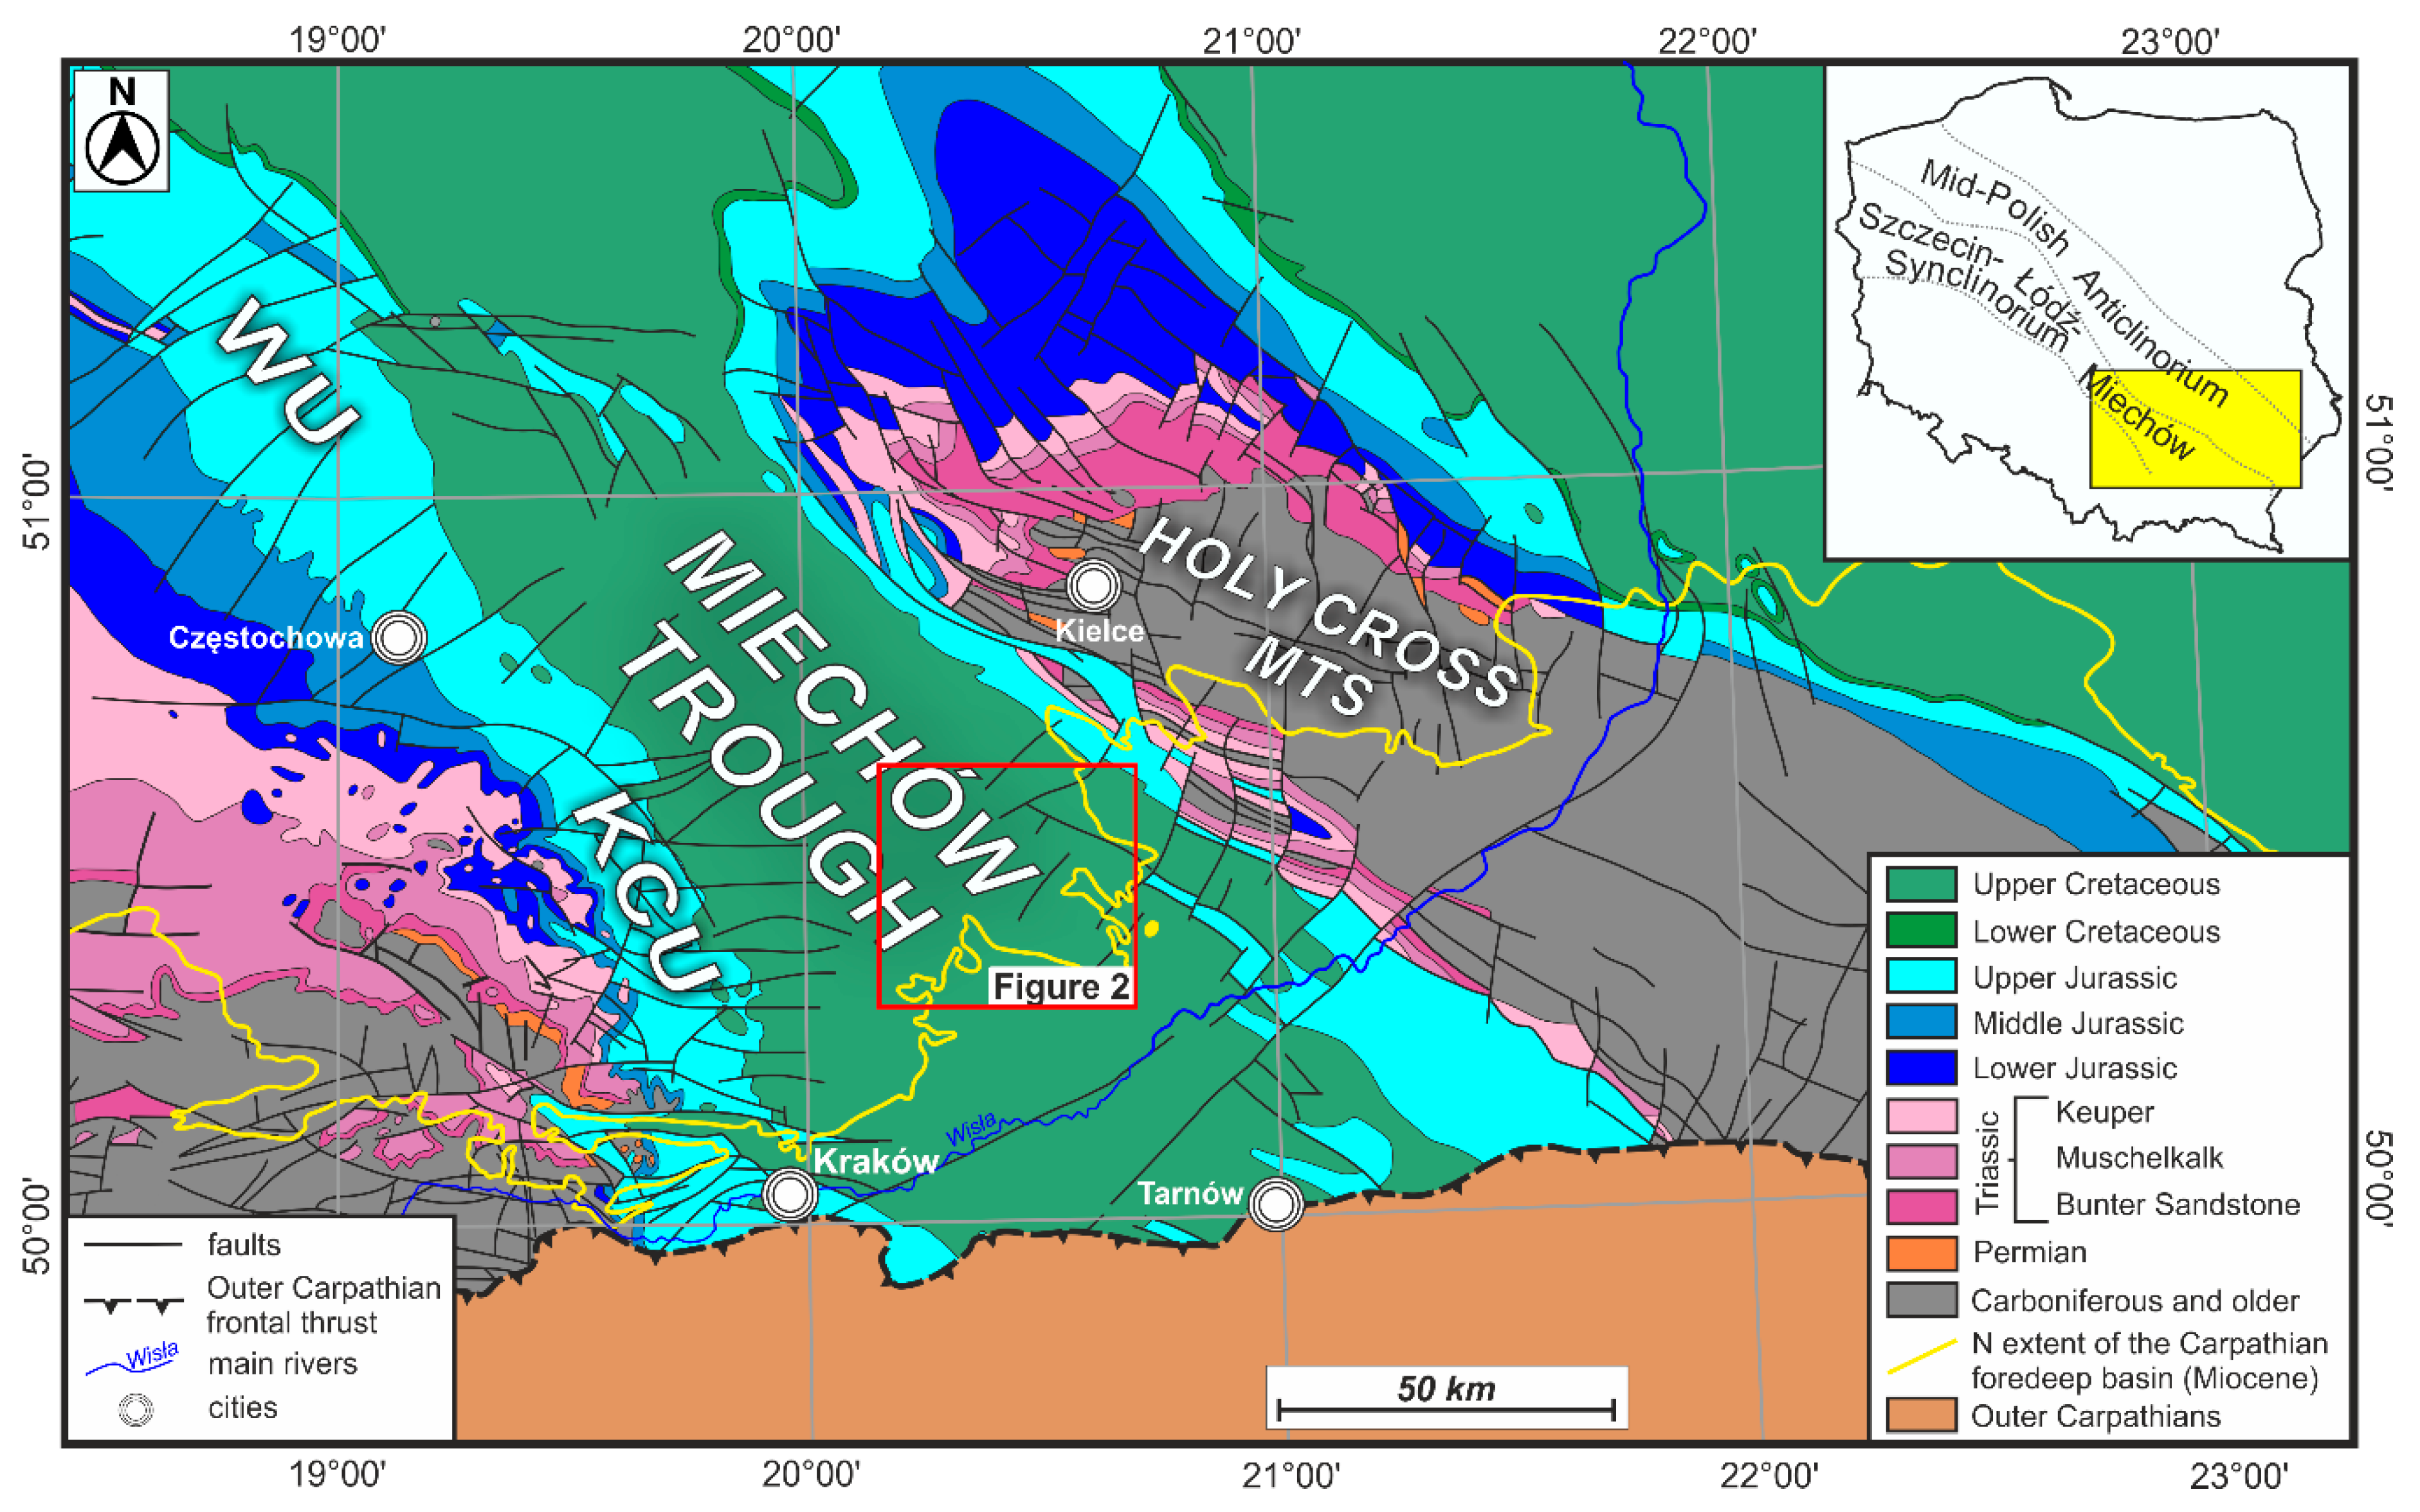 Geosciences | Free Full-Text | Seismic Characteristics and Development of  the Upper Jurassic Carbonate Buildups from the Miechów Trough (Southern  Poland) | HTML